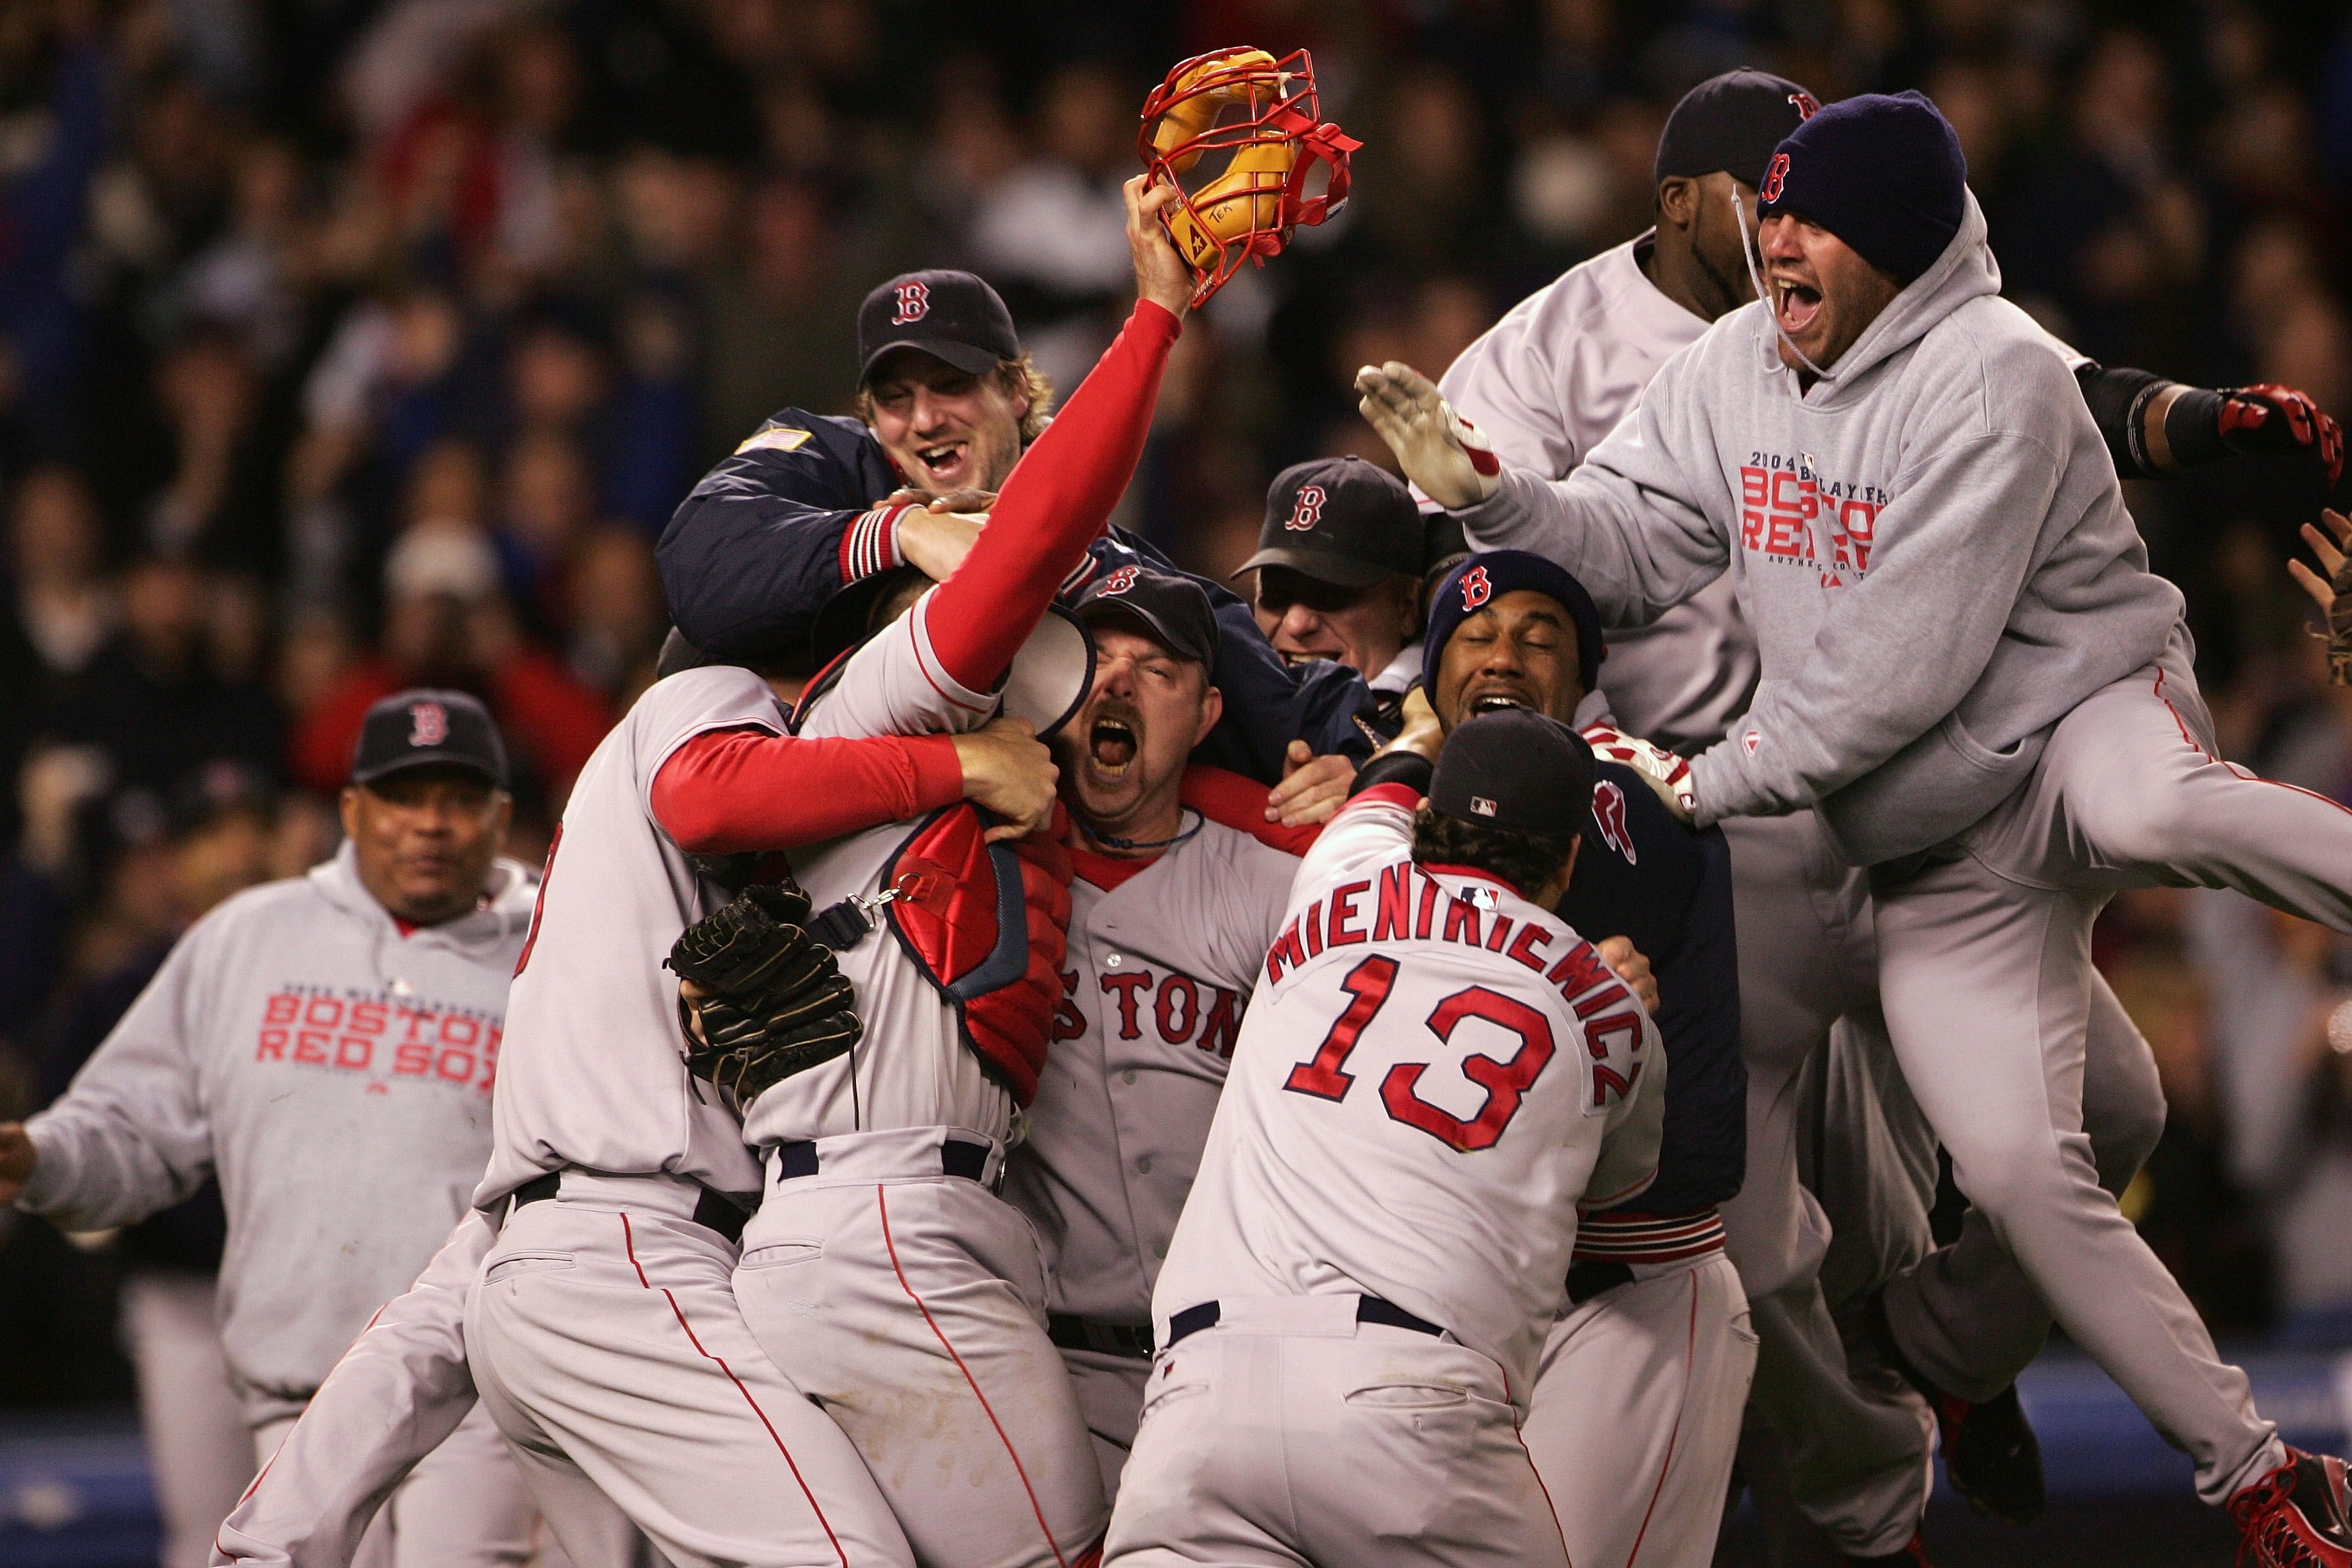 Boston Red Sox wins World Series in 2004